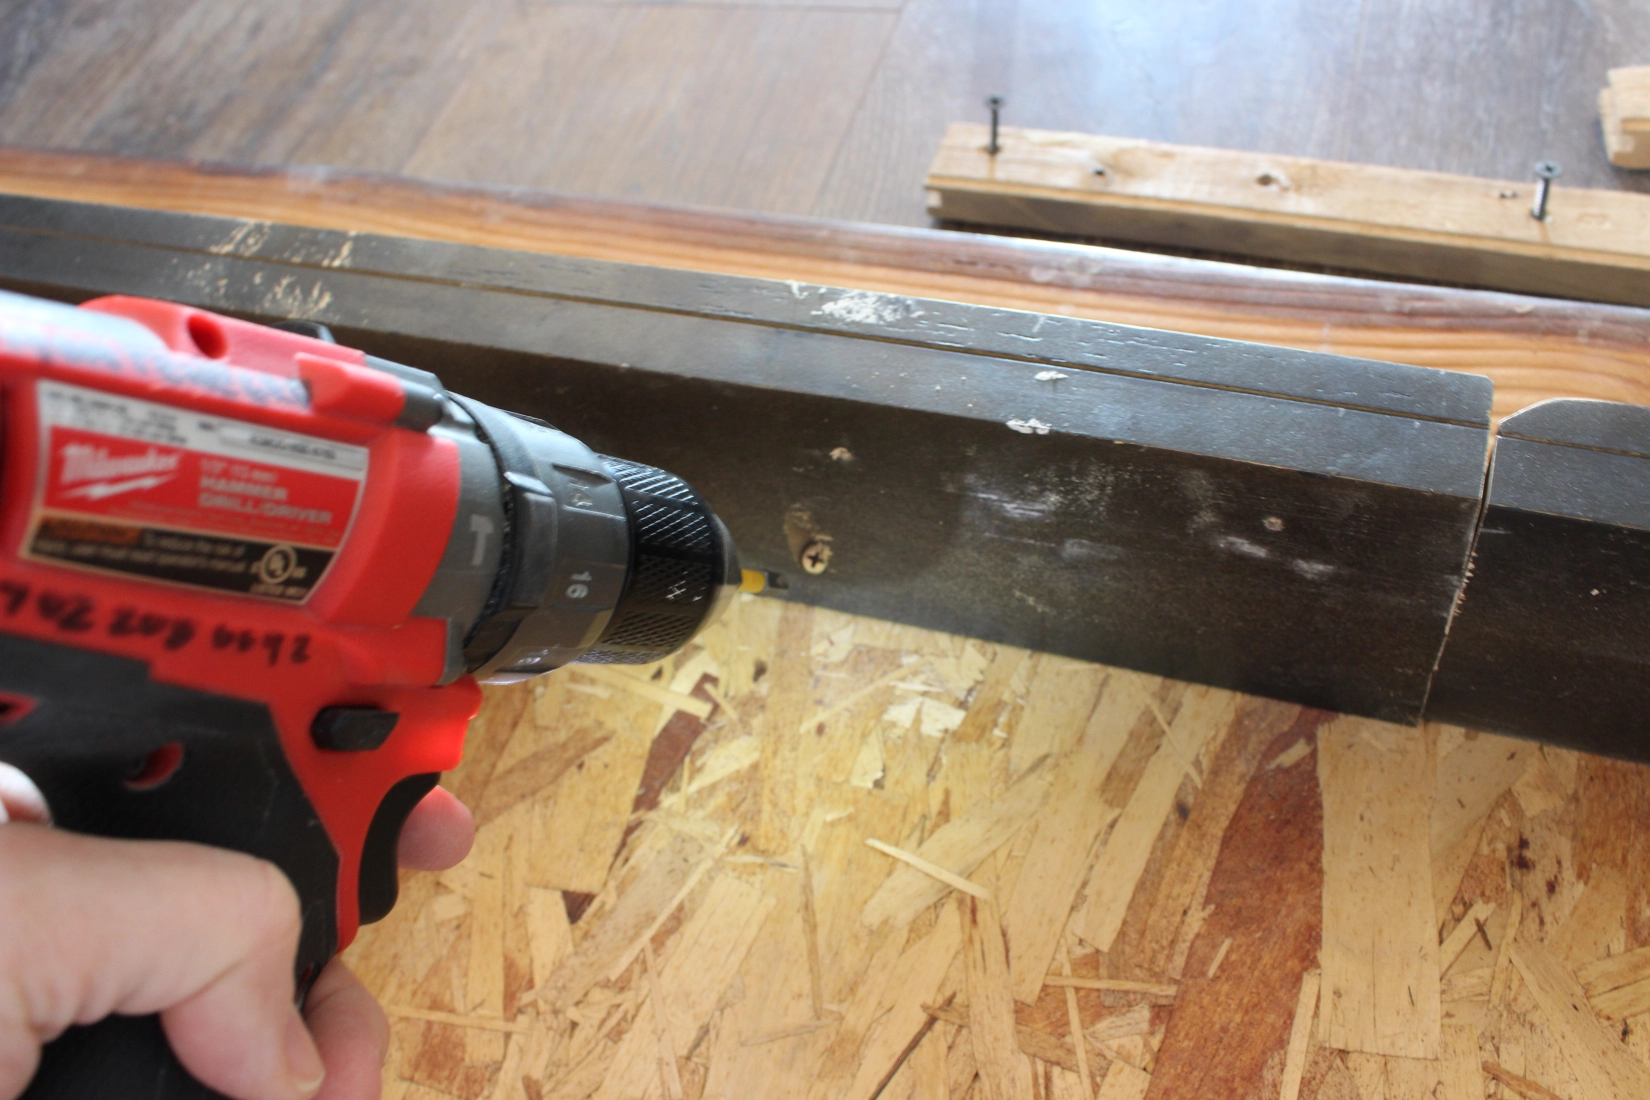 drilling a screw into wood